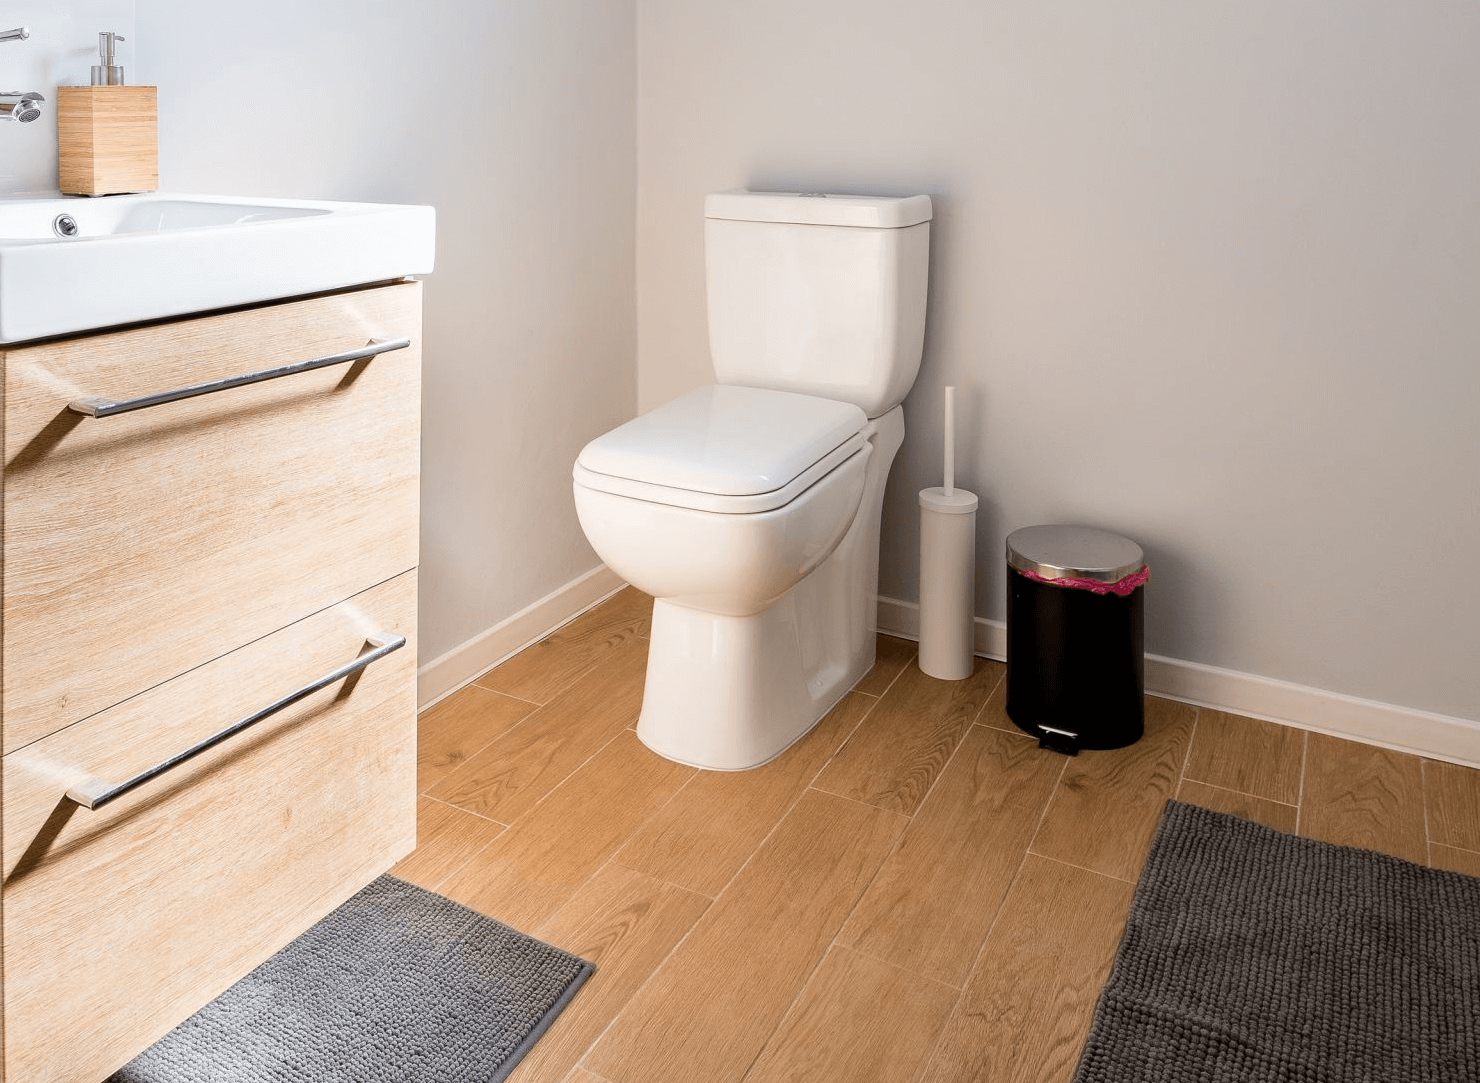 How to Remove, Replace or Install a Toilet Bowl | Twin Home Experts